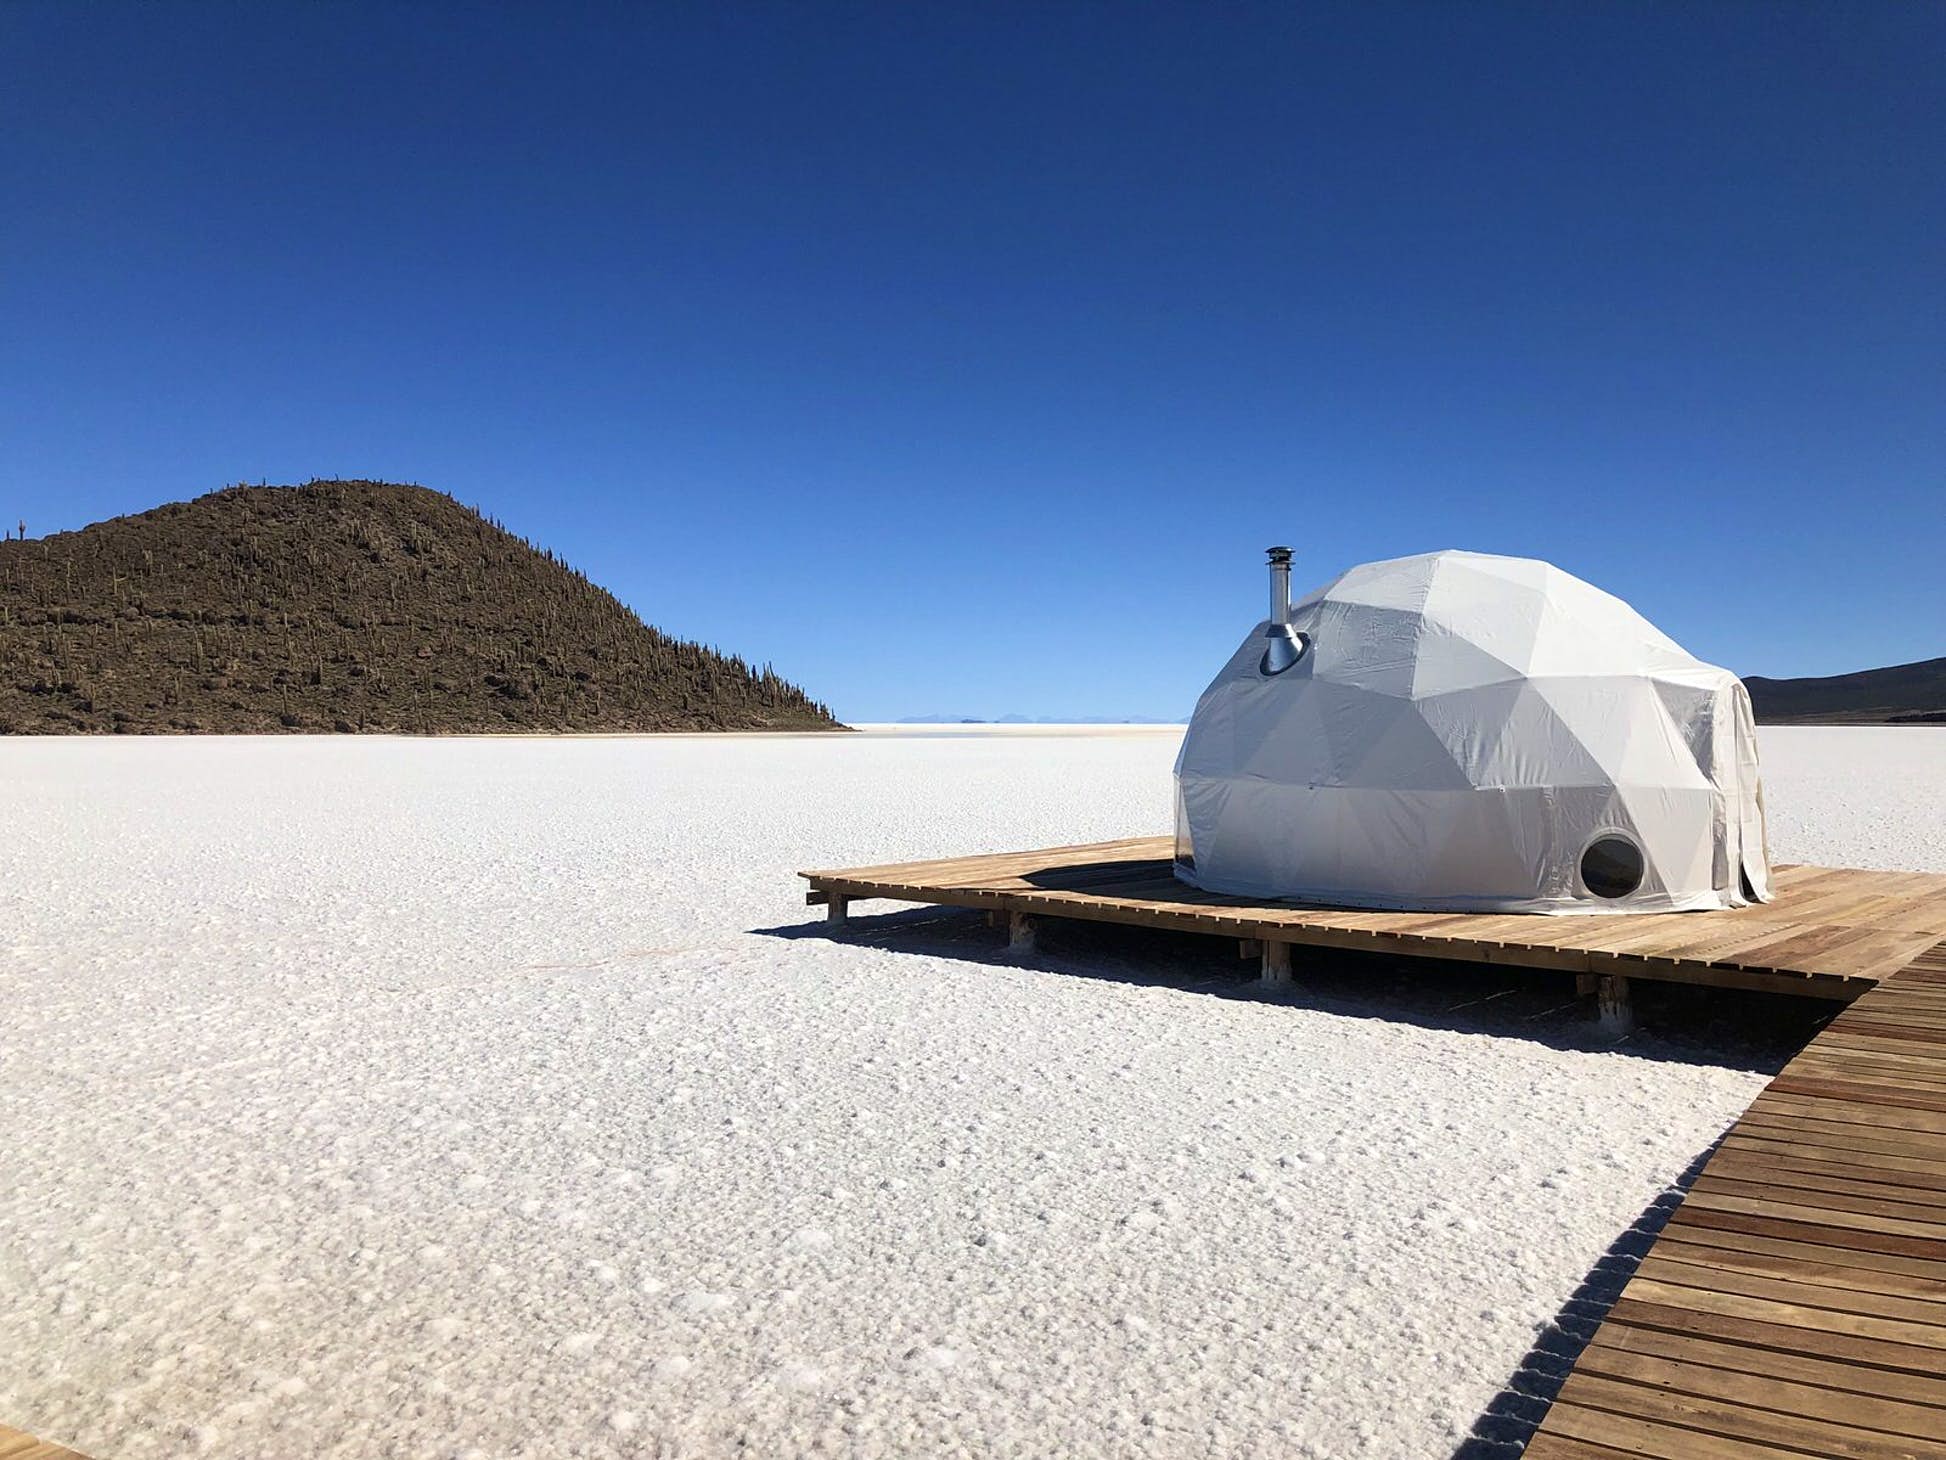 This brand new glamping experience in Bolivia's salt flats is now accepting bookings © Kacha Lodge